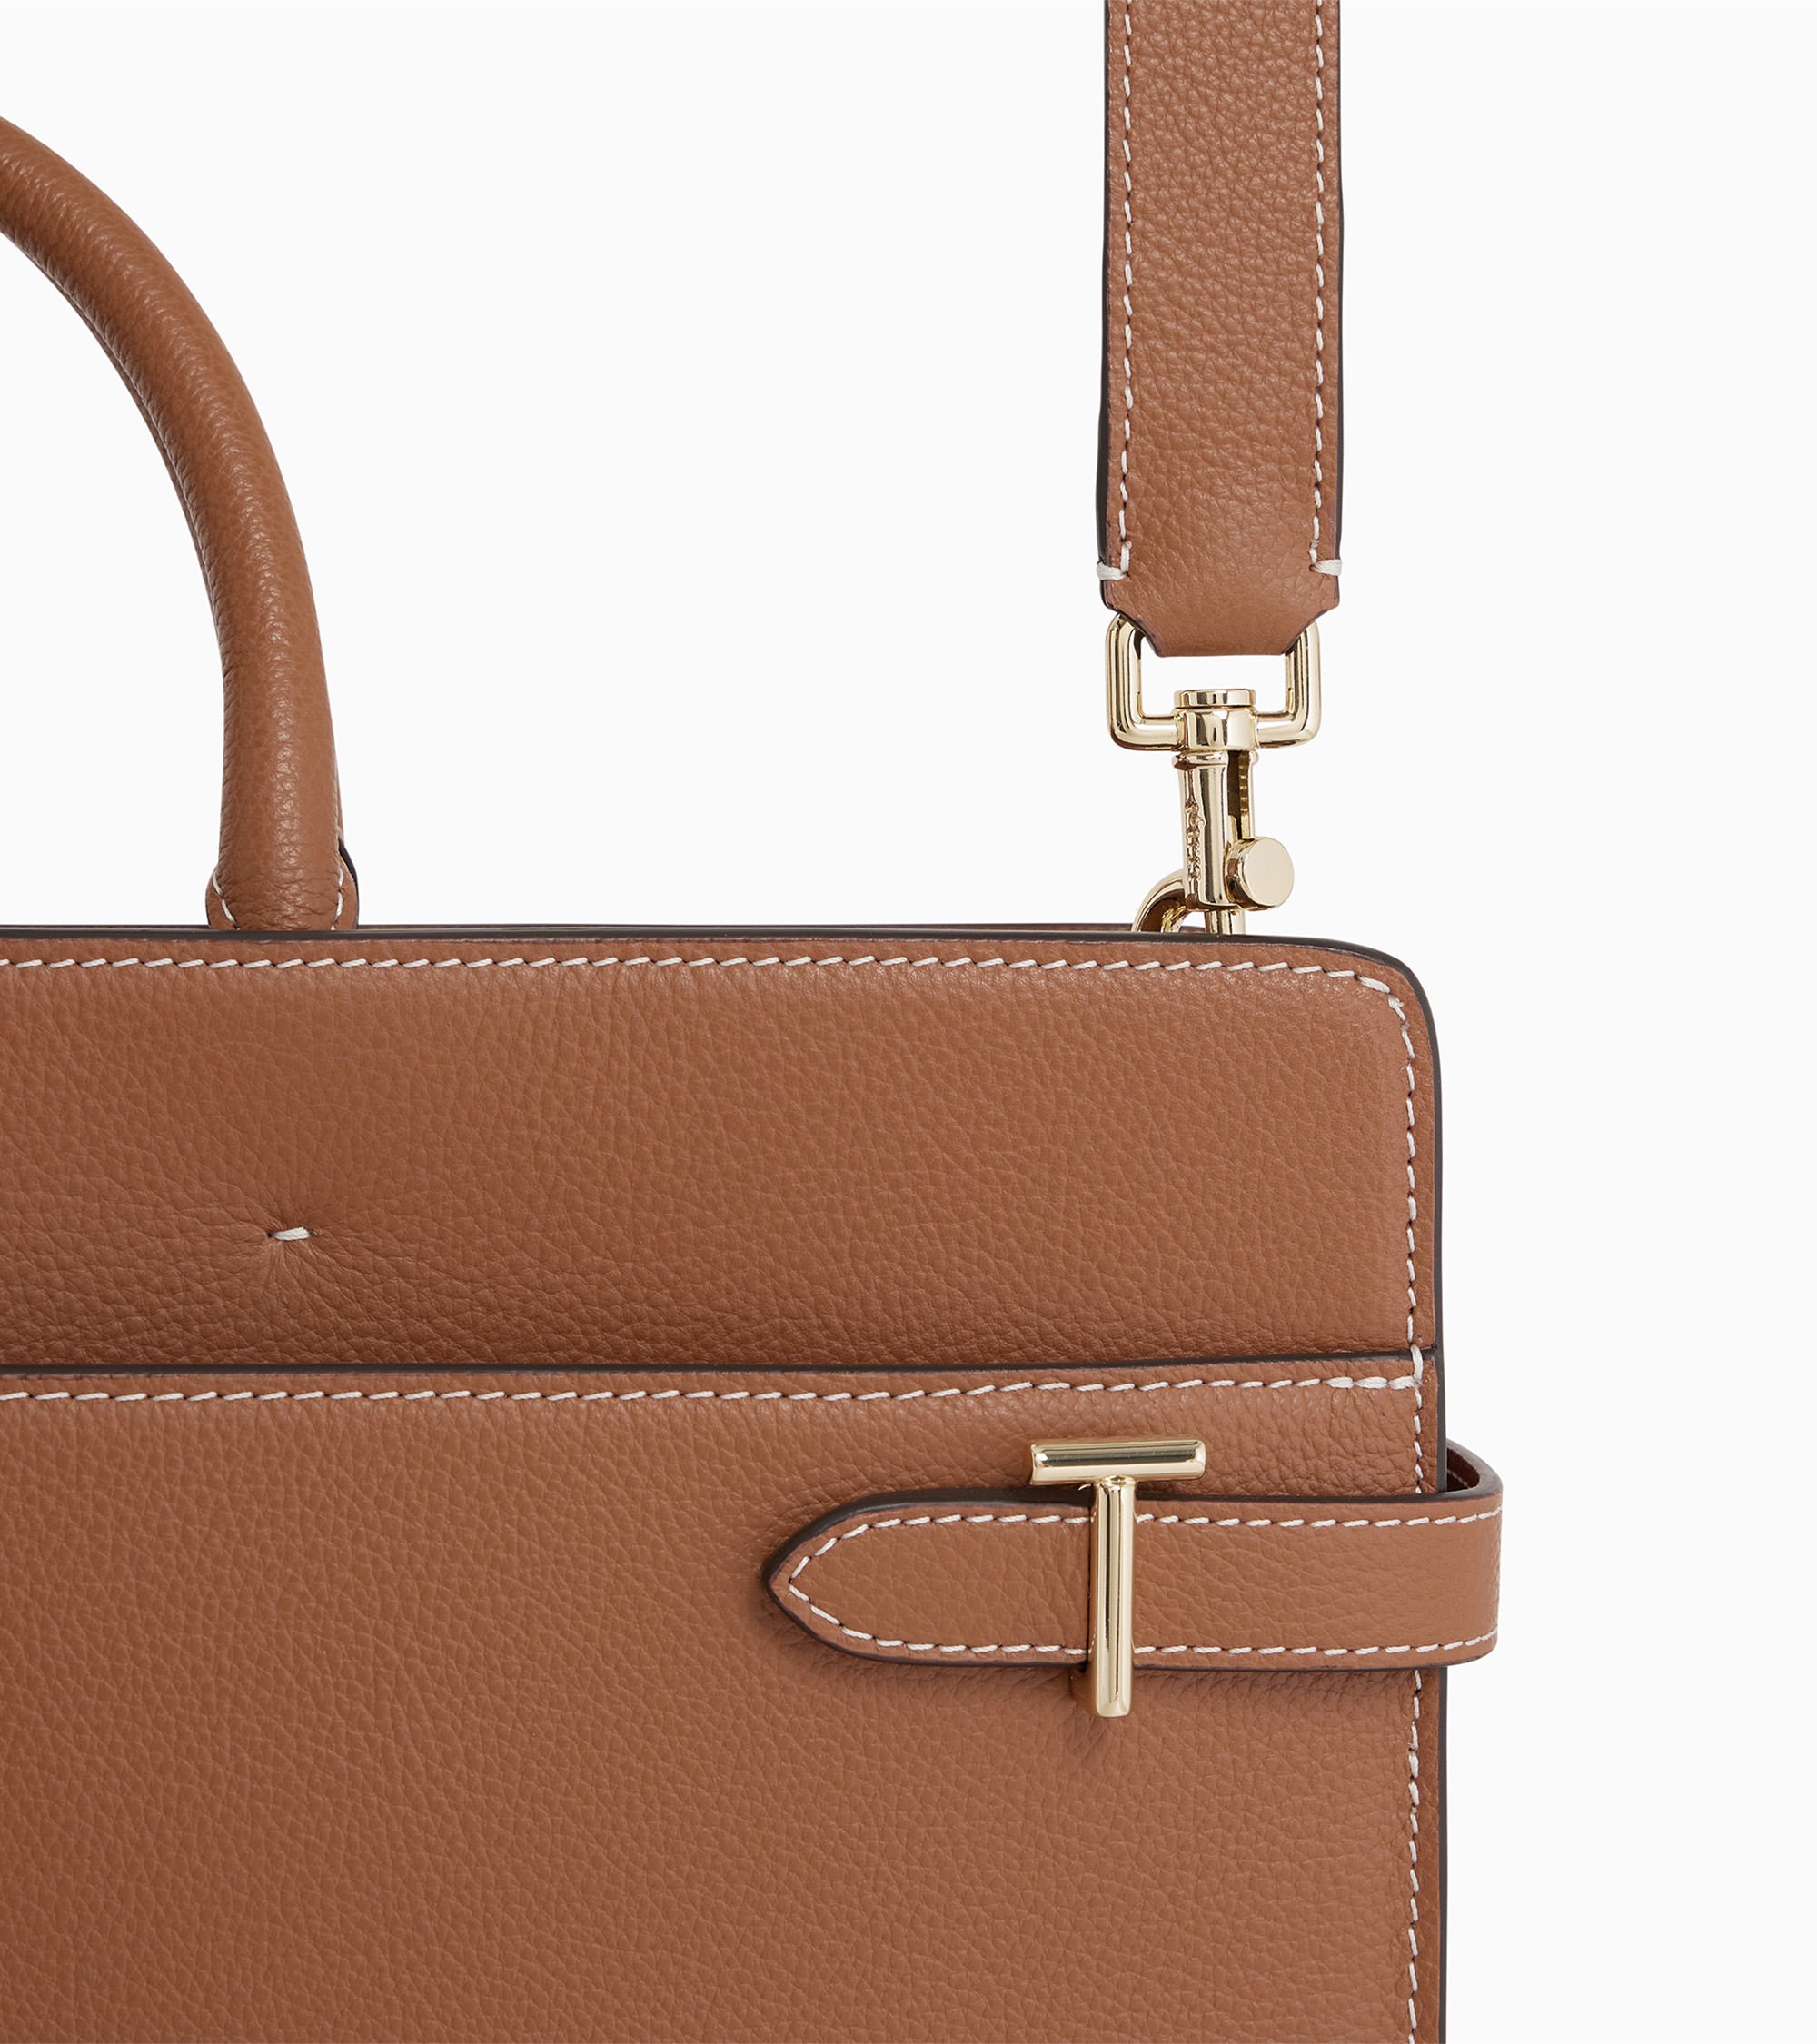 Emilie briefcase in grained leather